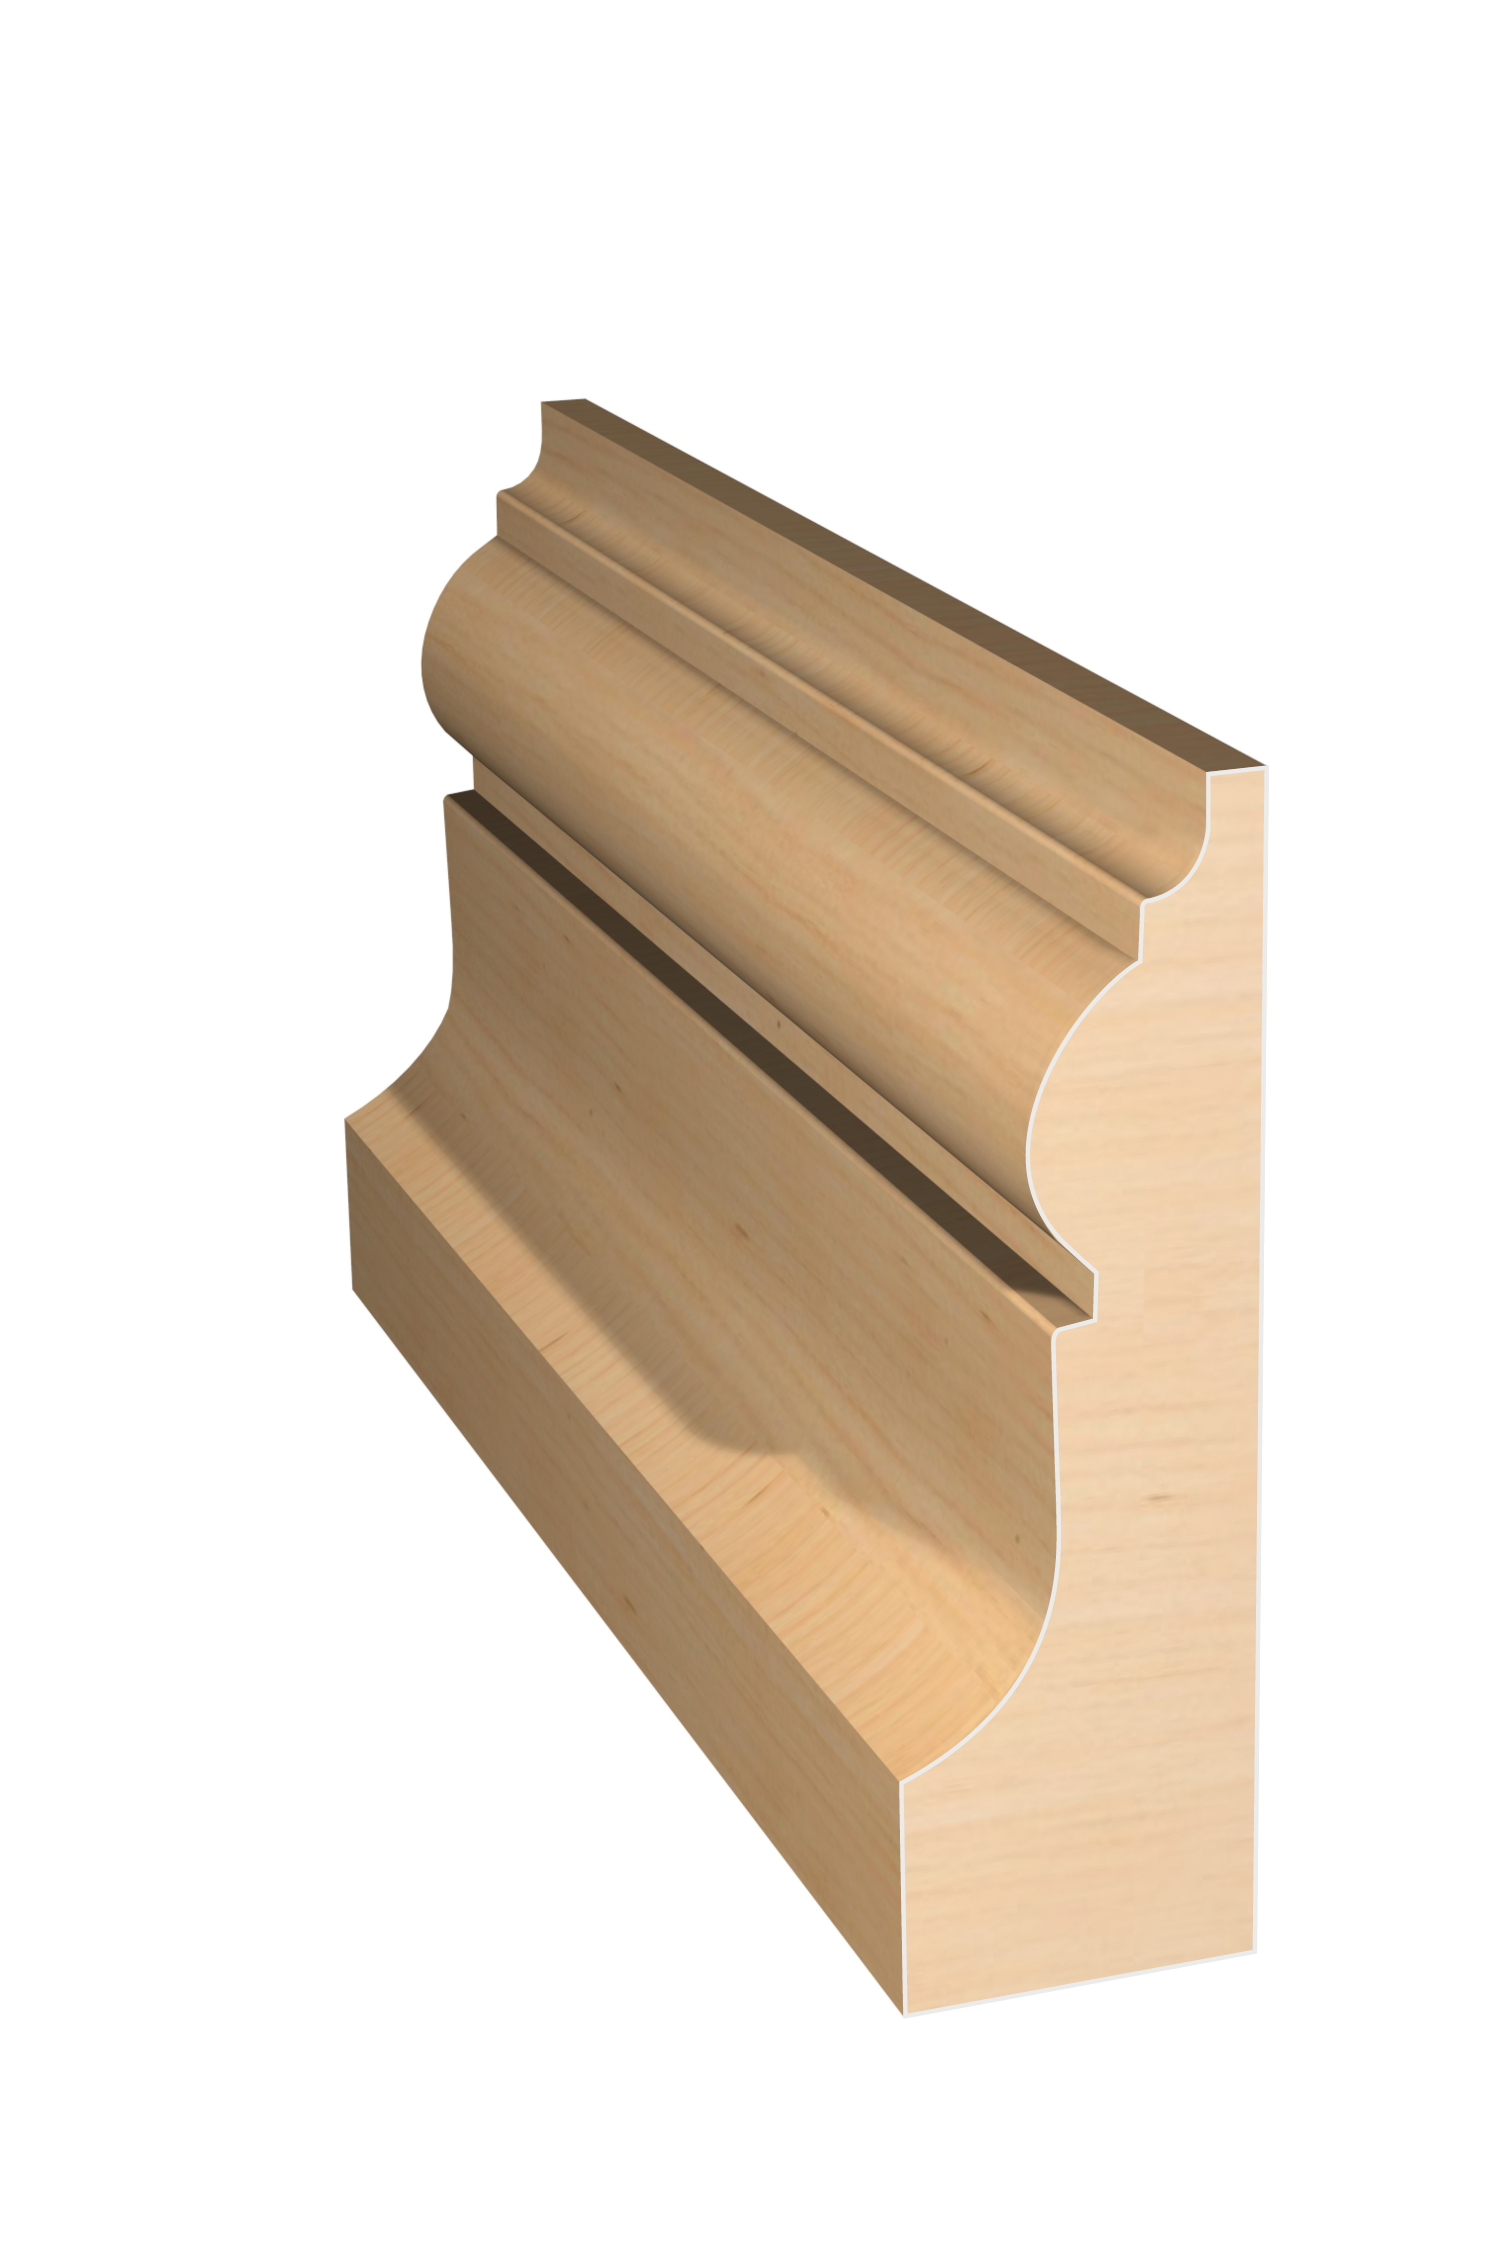 Three dimensional rendering of custom casing wood molding CAPL31427 made by Public Lumber Company in Detroit.